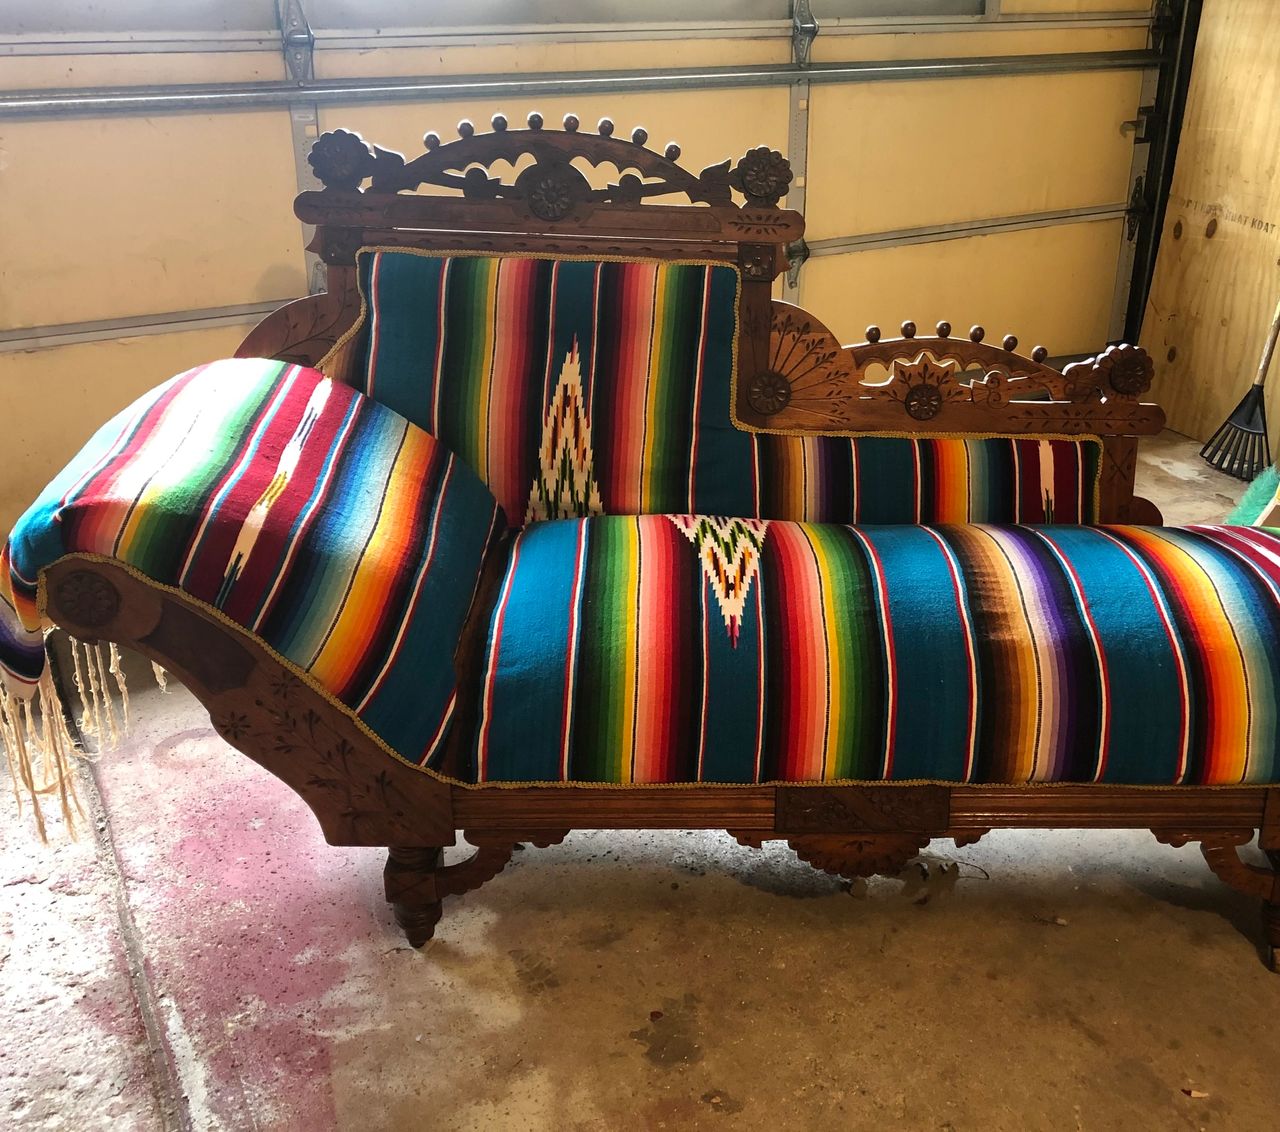 Vintage chaise lounge covered in Mexican blanket in a garage